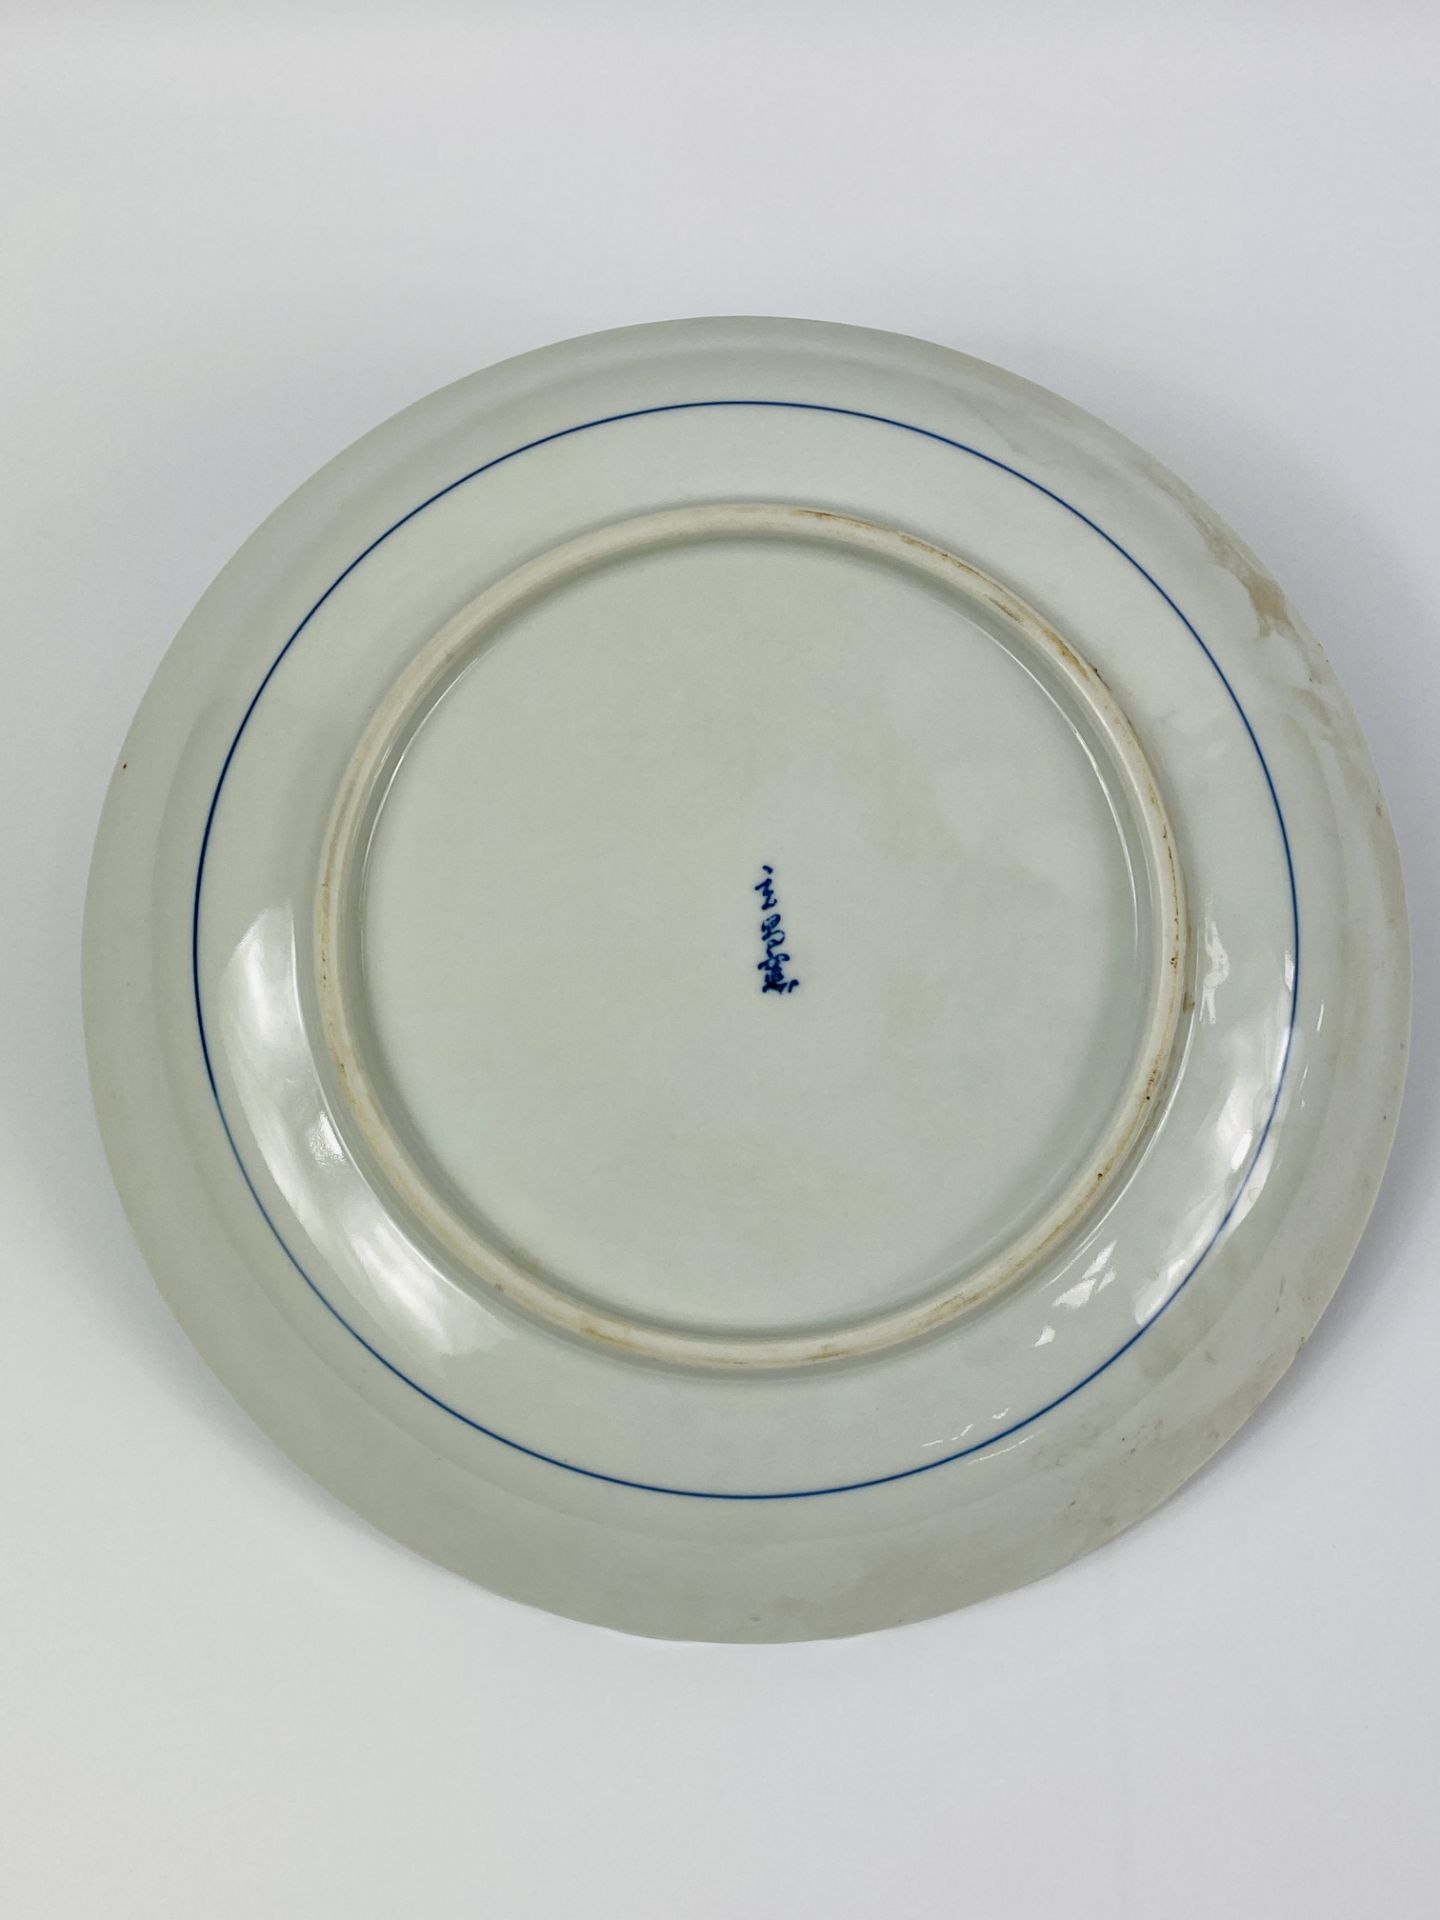 Oriental blue and white bowl - Image 5 of 5